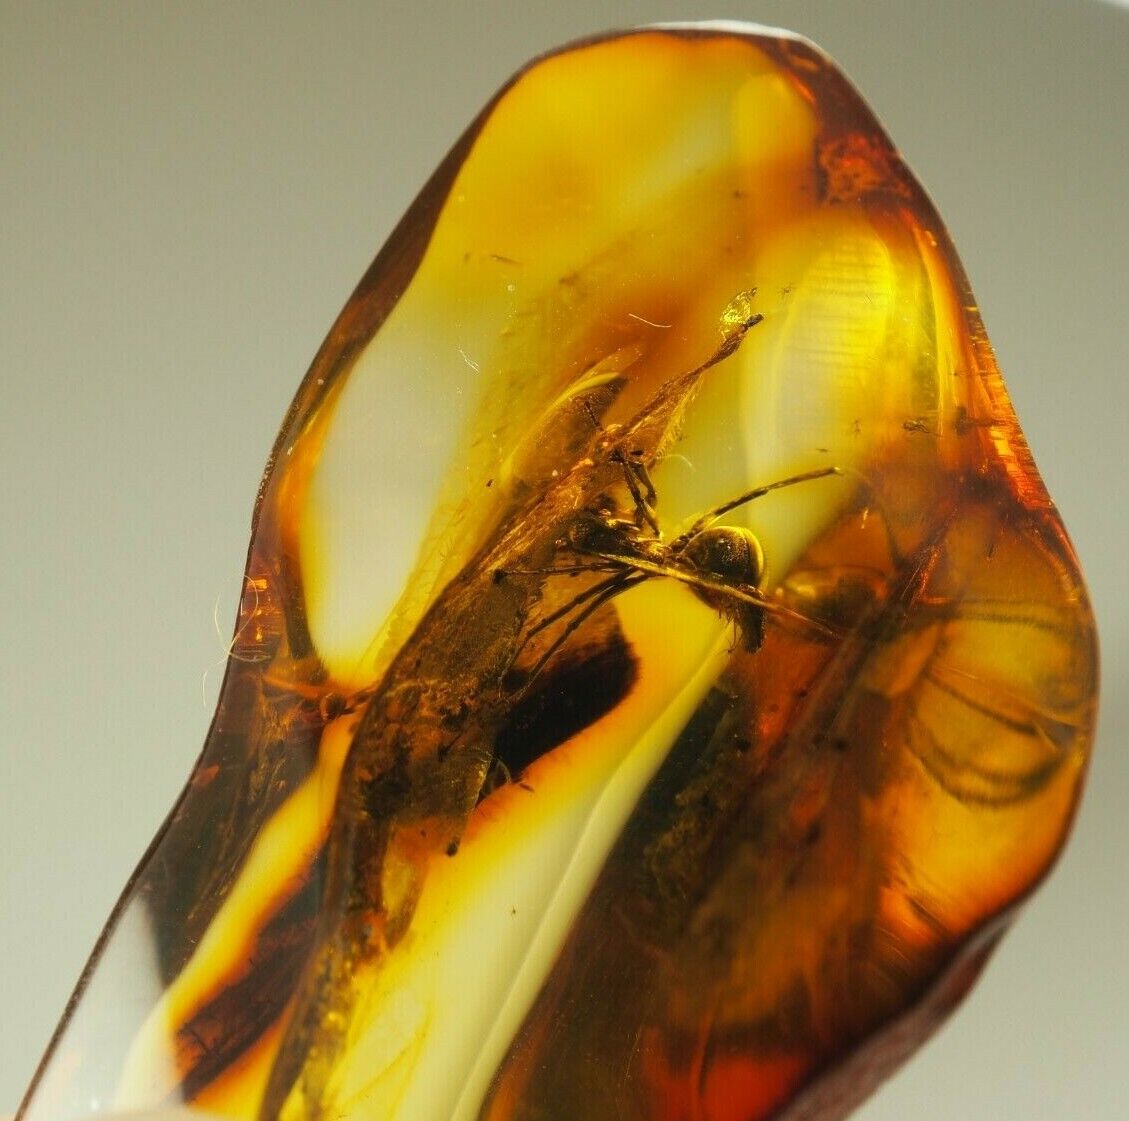 Massive Ant 10 mm. lenght in Genuine BALTIC AMBER stone 4.1 g. F42